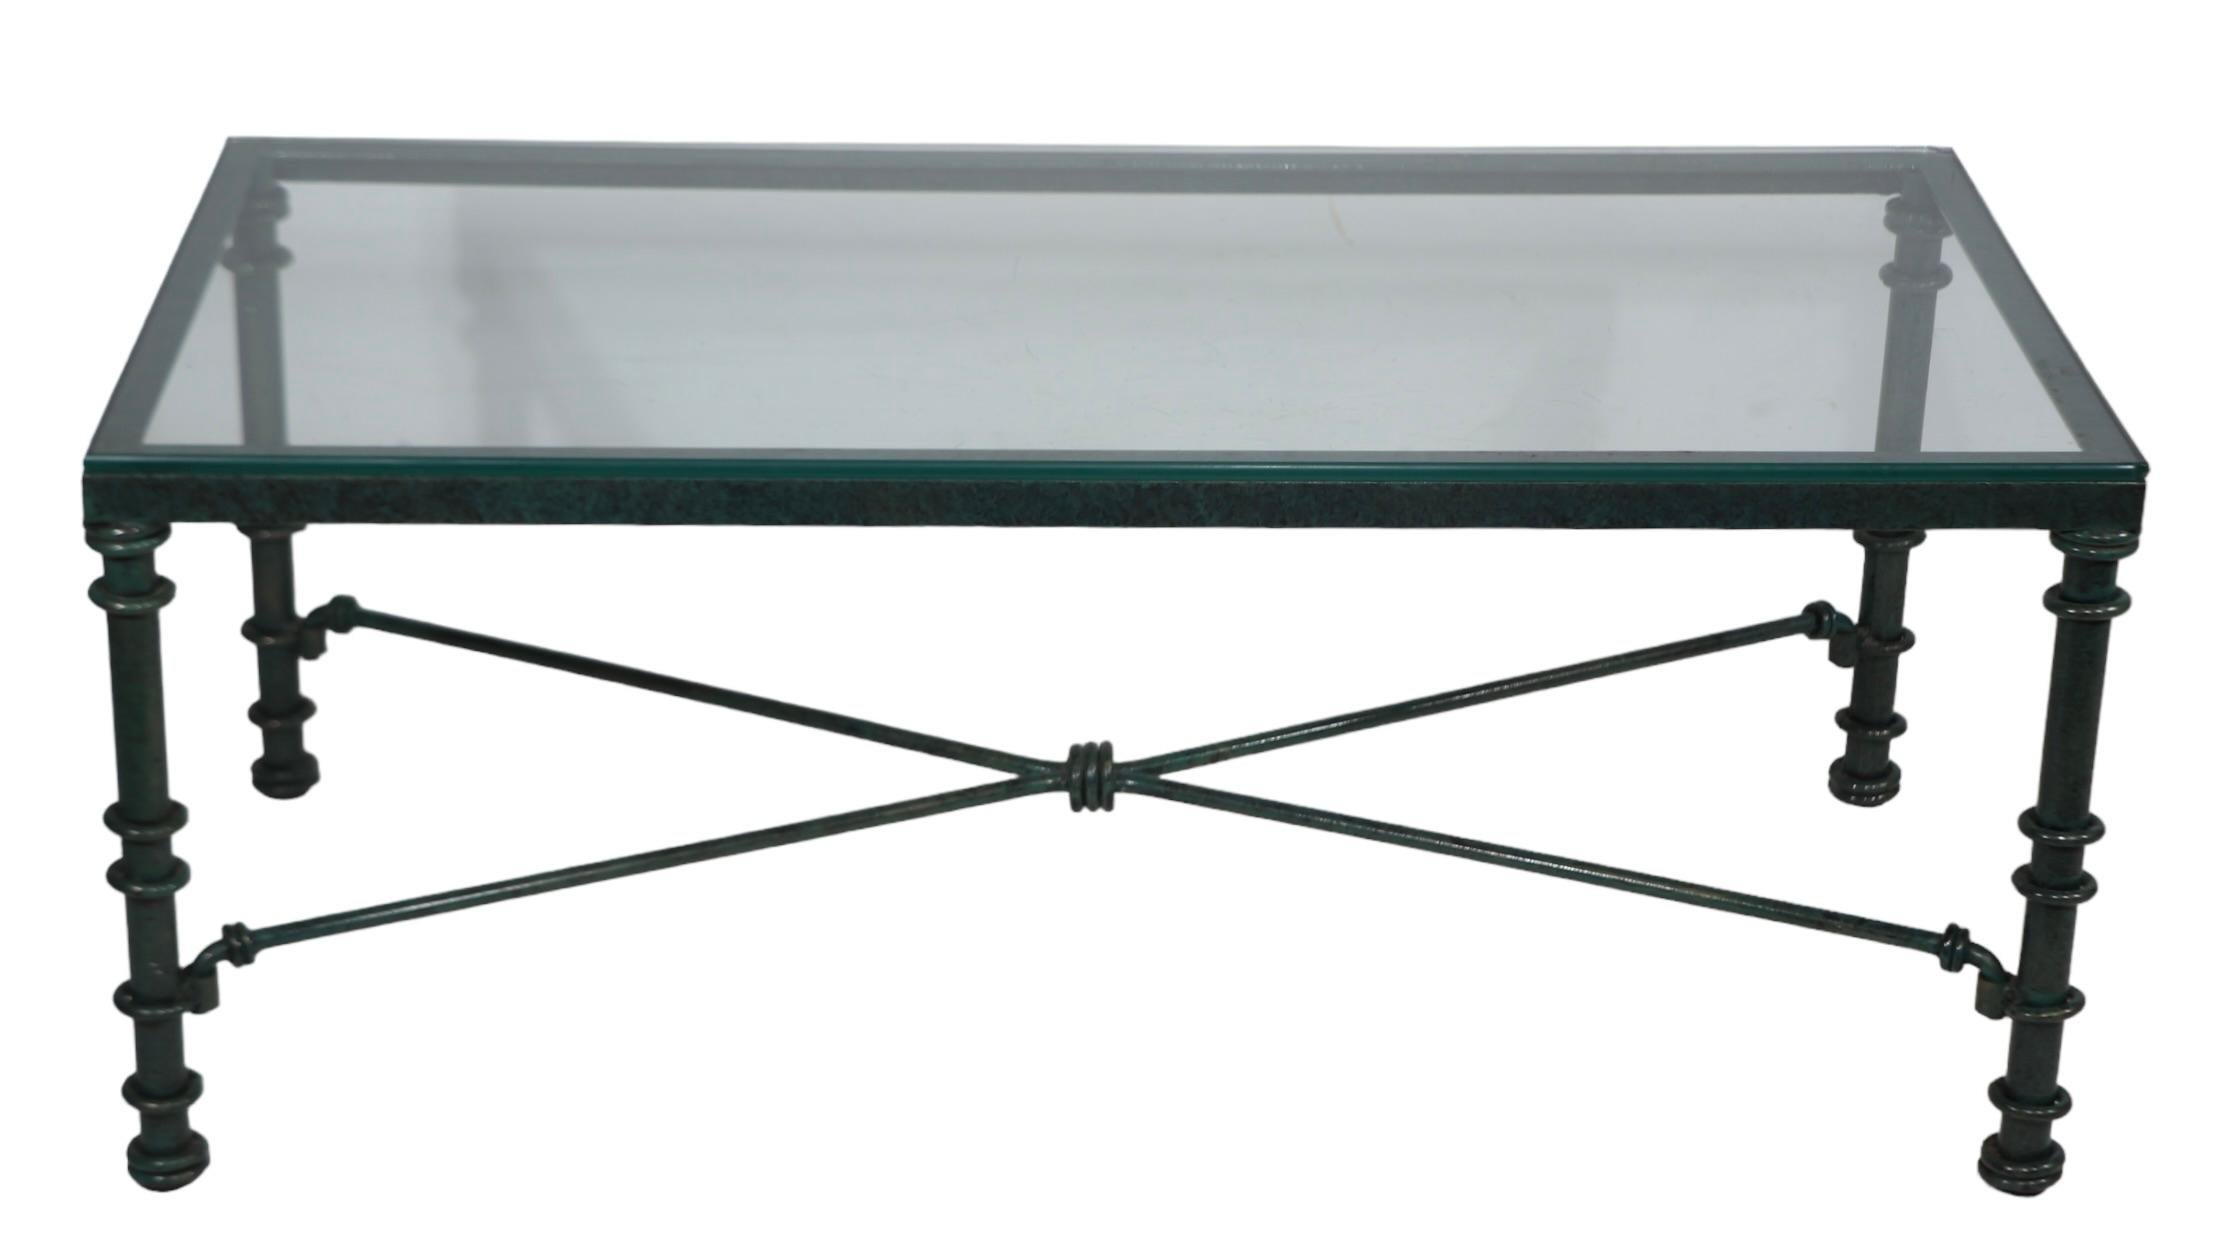 Brutalist Faux Verdigris Finish Glass Top Coffee Table c. 1970/1980's For Sale 3